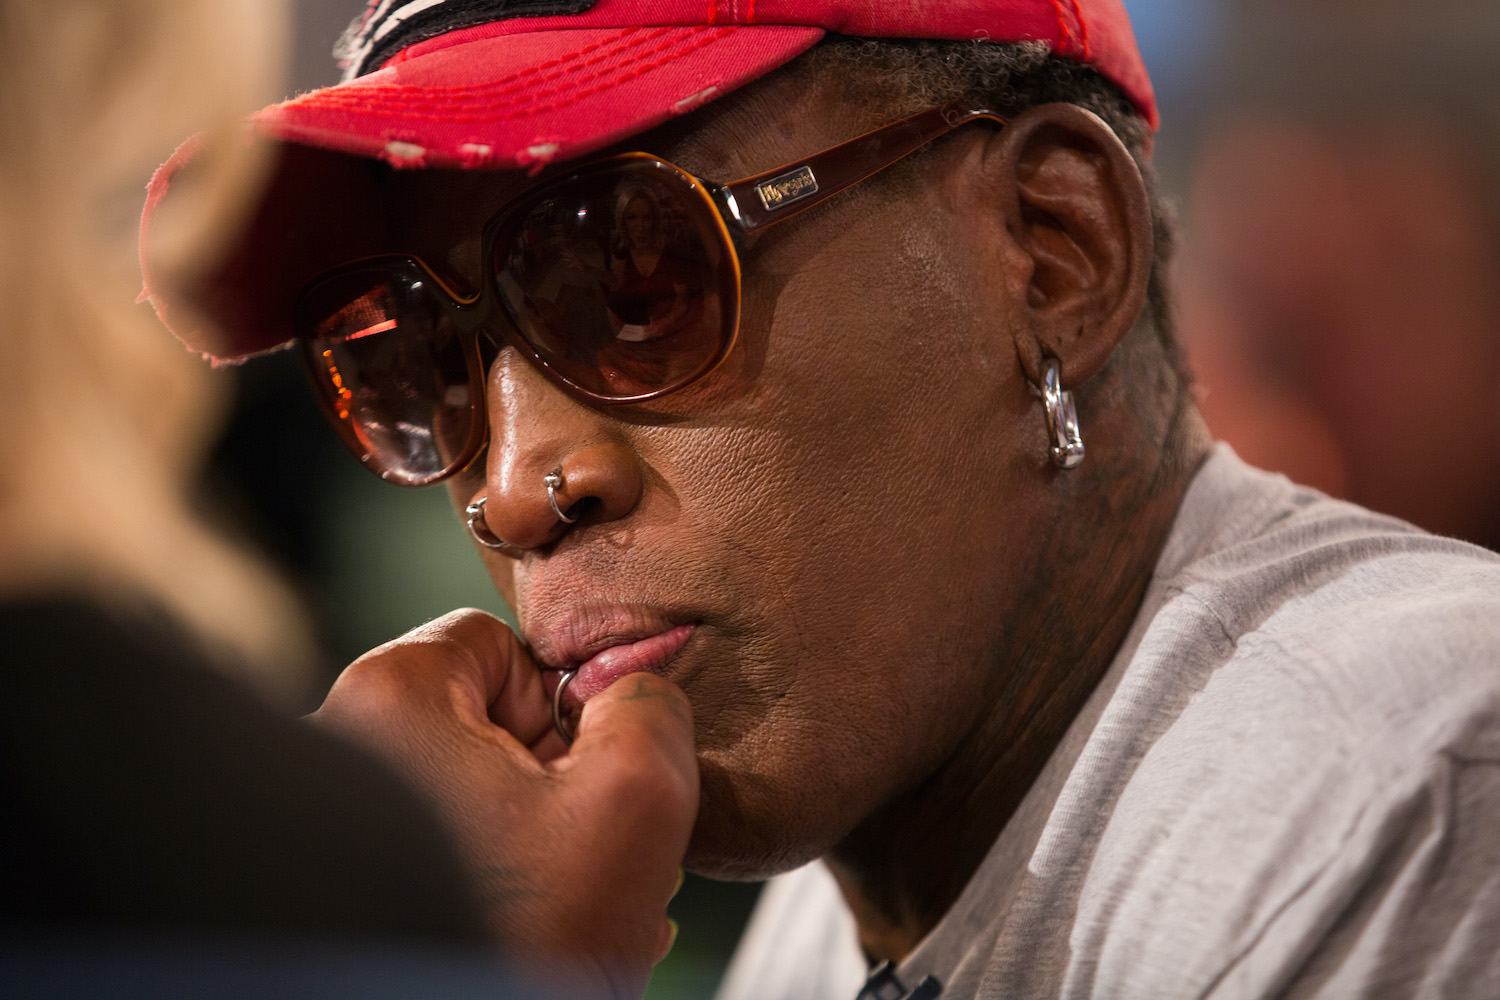 Dennis Rodman during a 2018 appearance on Megyn Kelly TODAY.